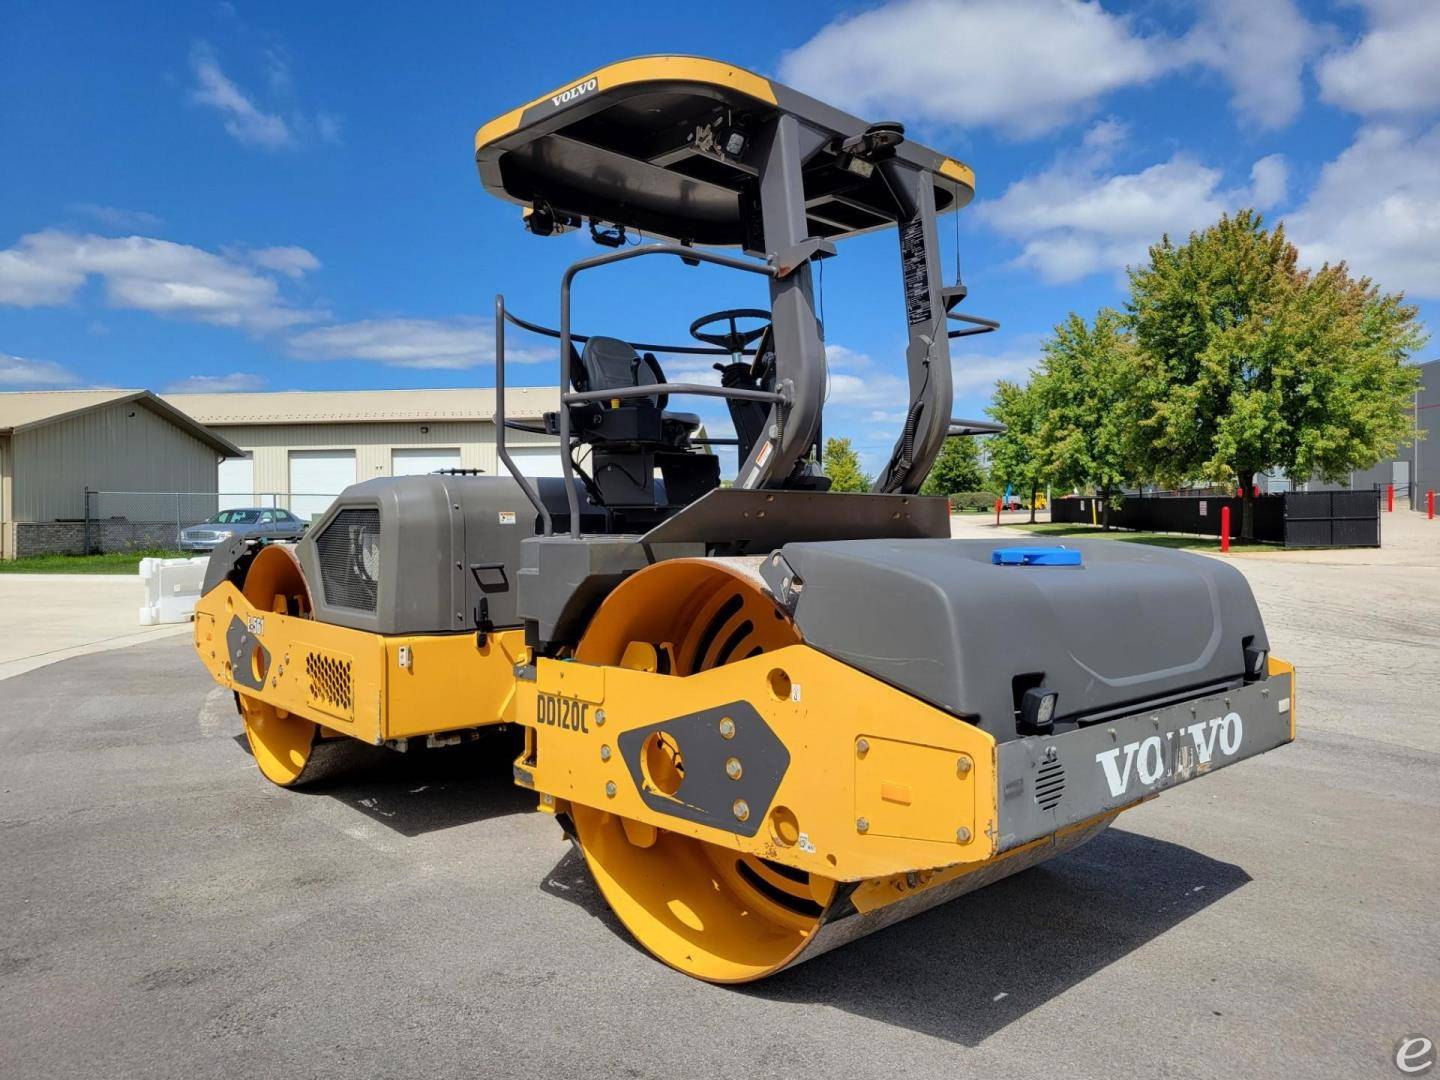 2018 Volvo DD120C Earth Moving and Construction Forklift - 123Forklift